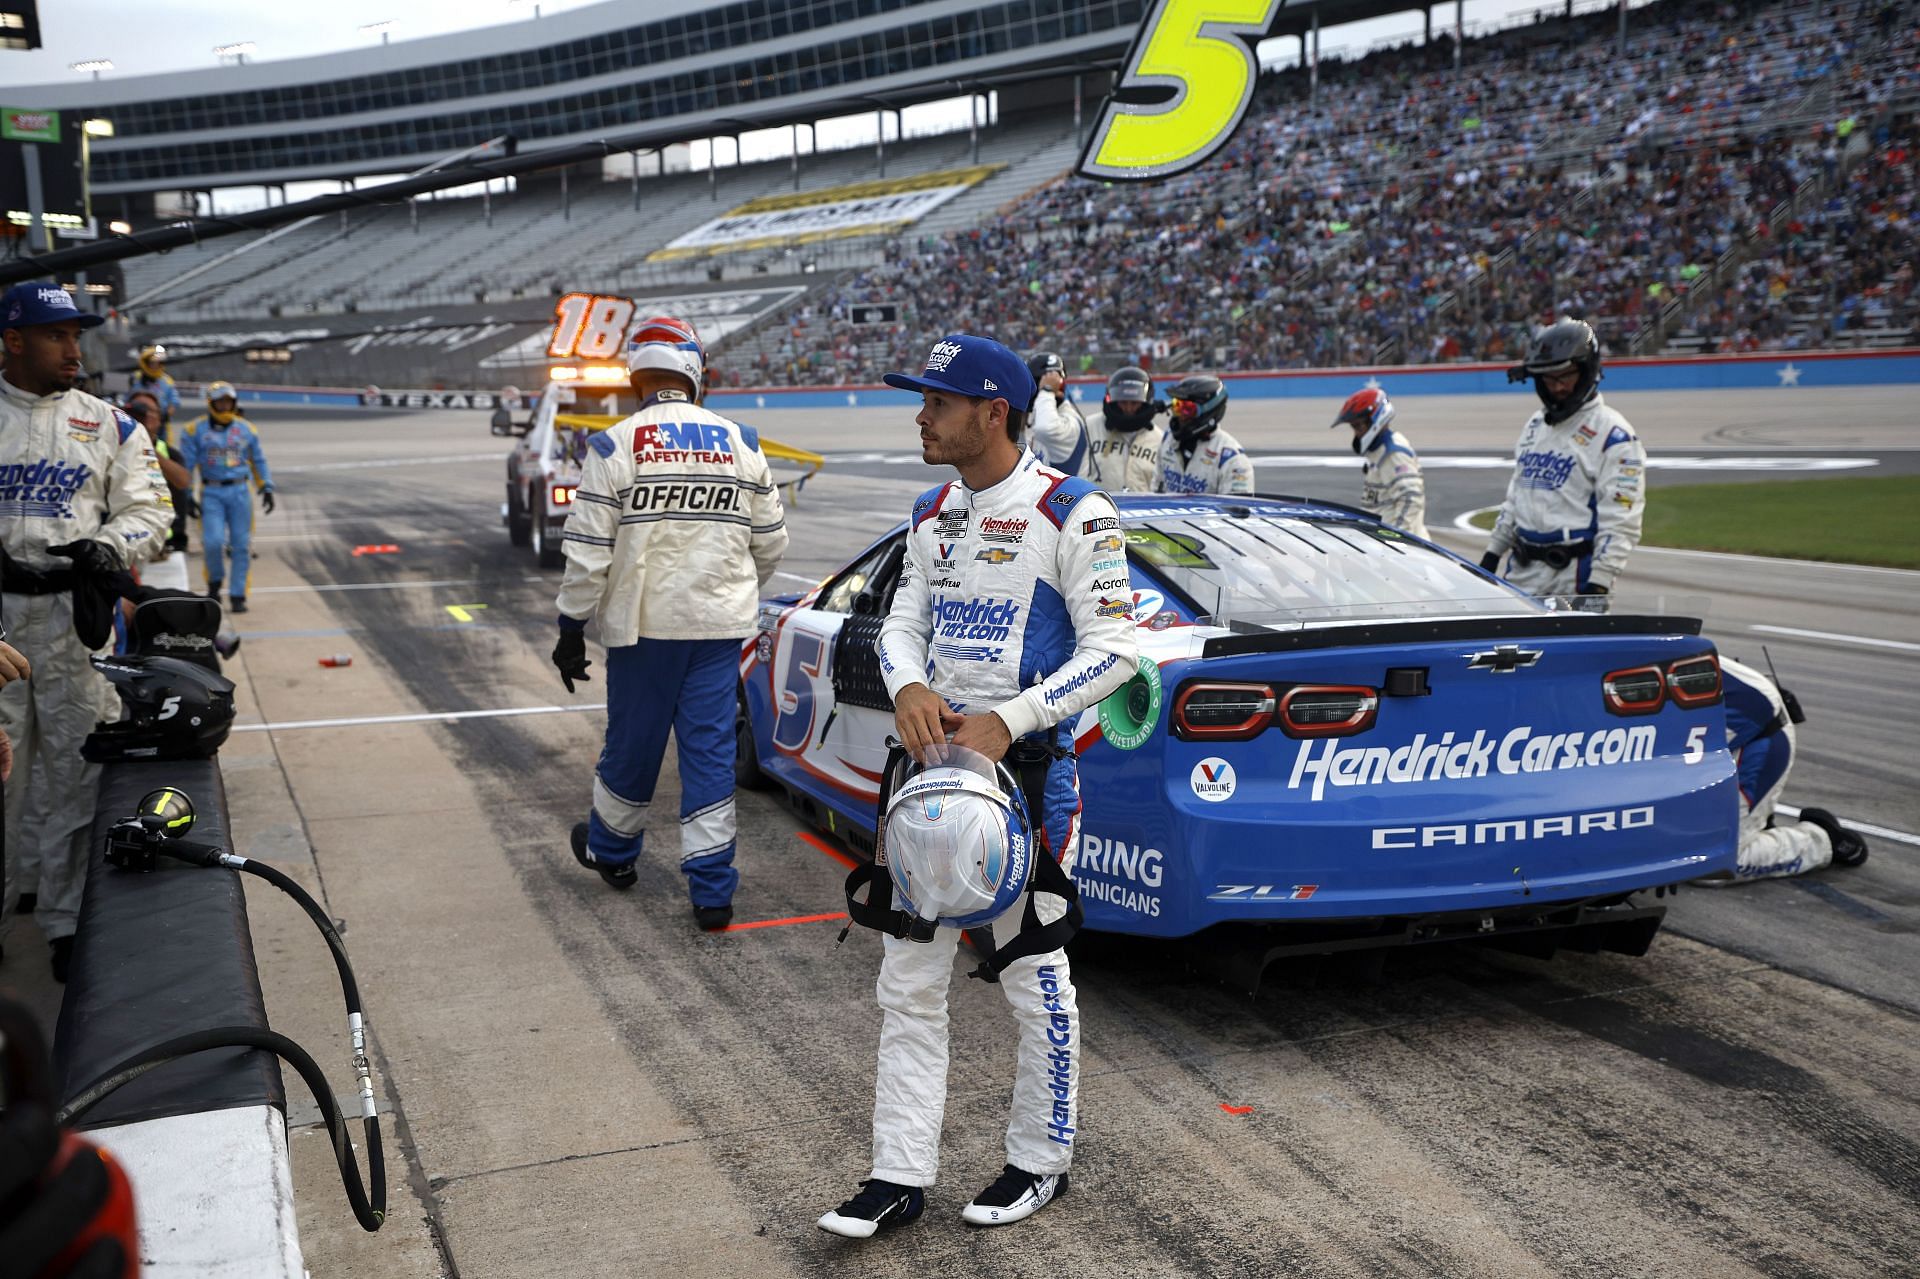 Kyle Larson exits his car after an on-track incident during the NASCAR Cup Series All-Star Race at Texas Motor Speedway